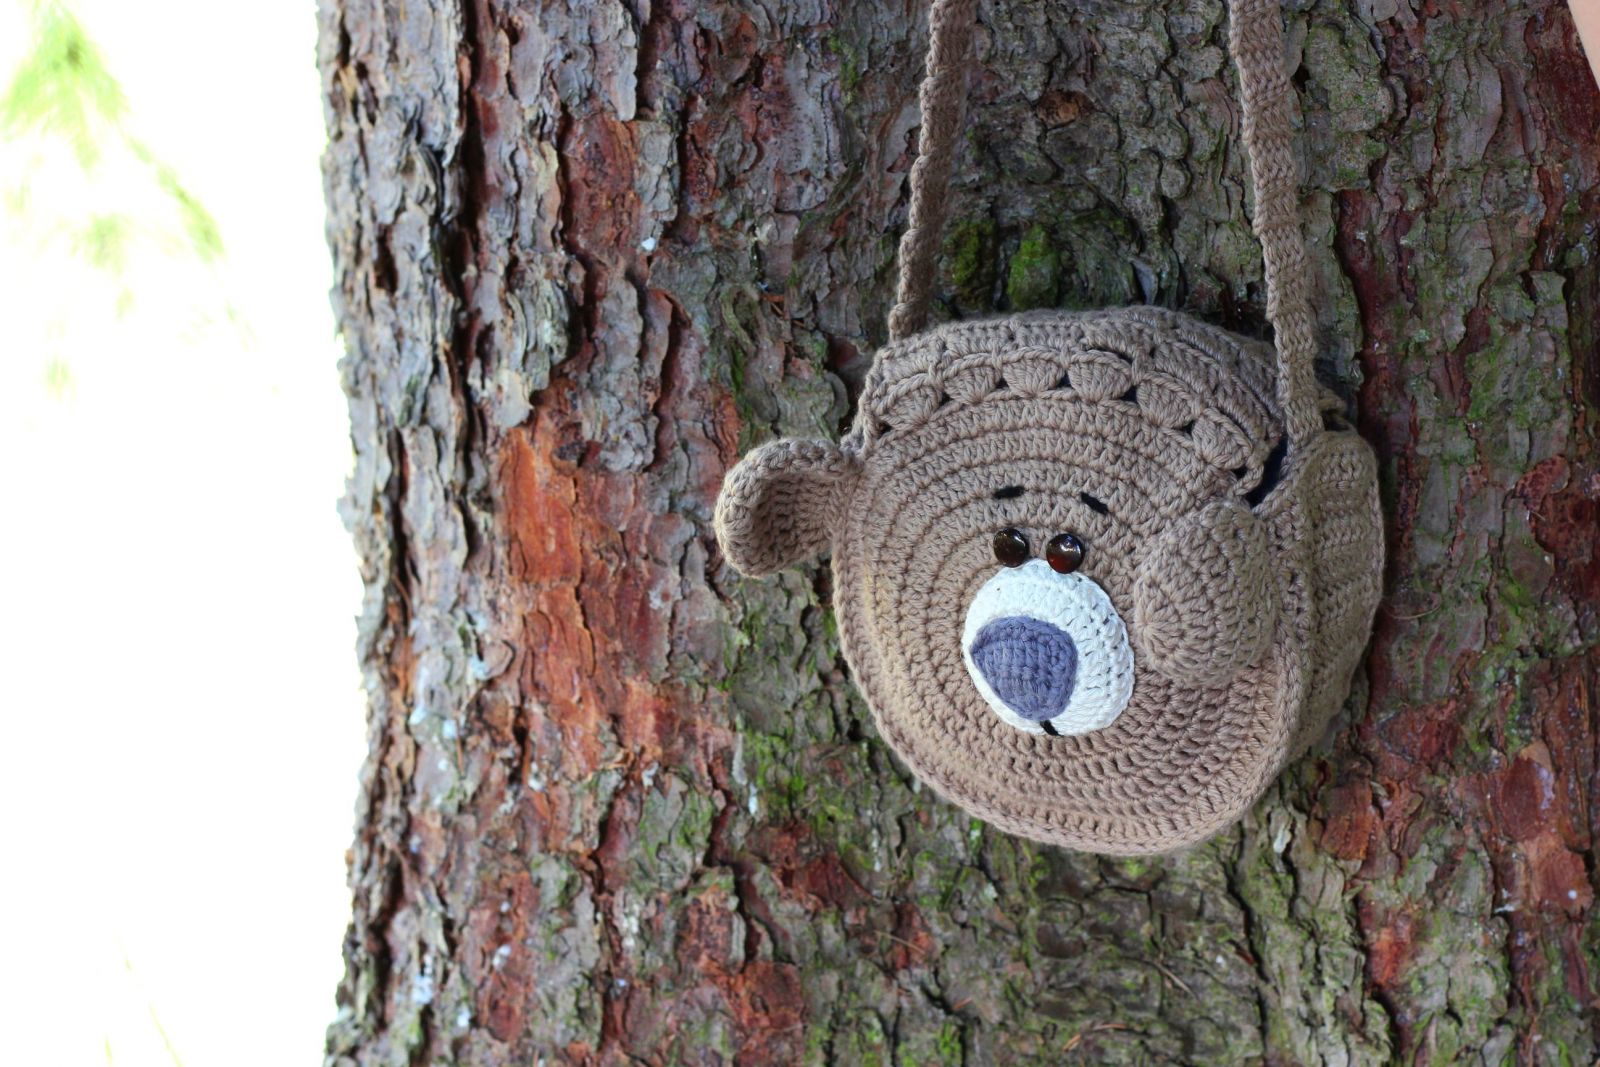 Blog content image for 'Bear Purse Free Crochet Pattern'